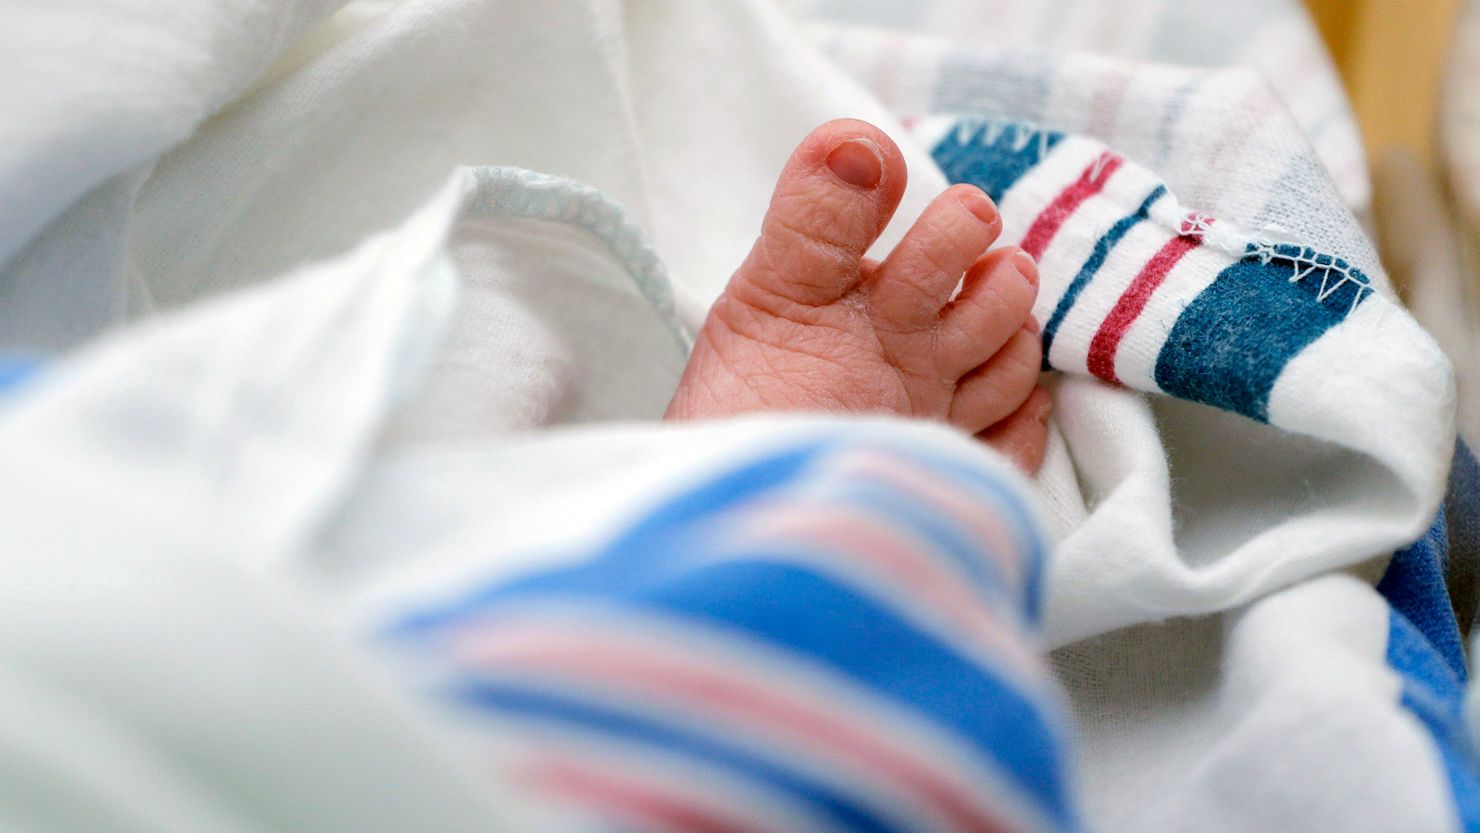 Under strict abortion law, Texas had nearly 10,000 more births